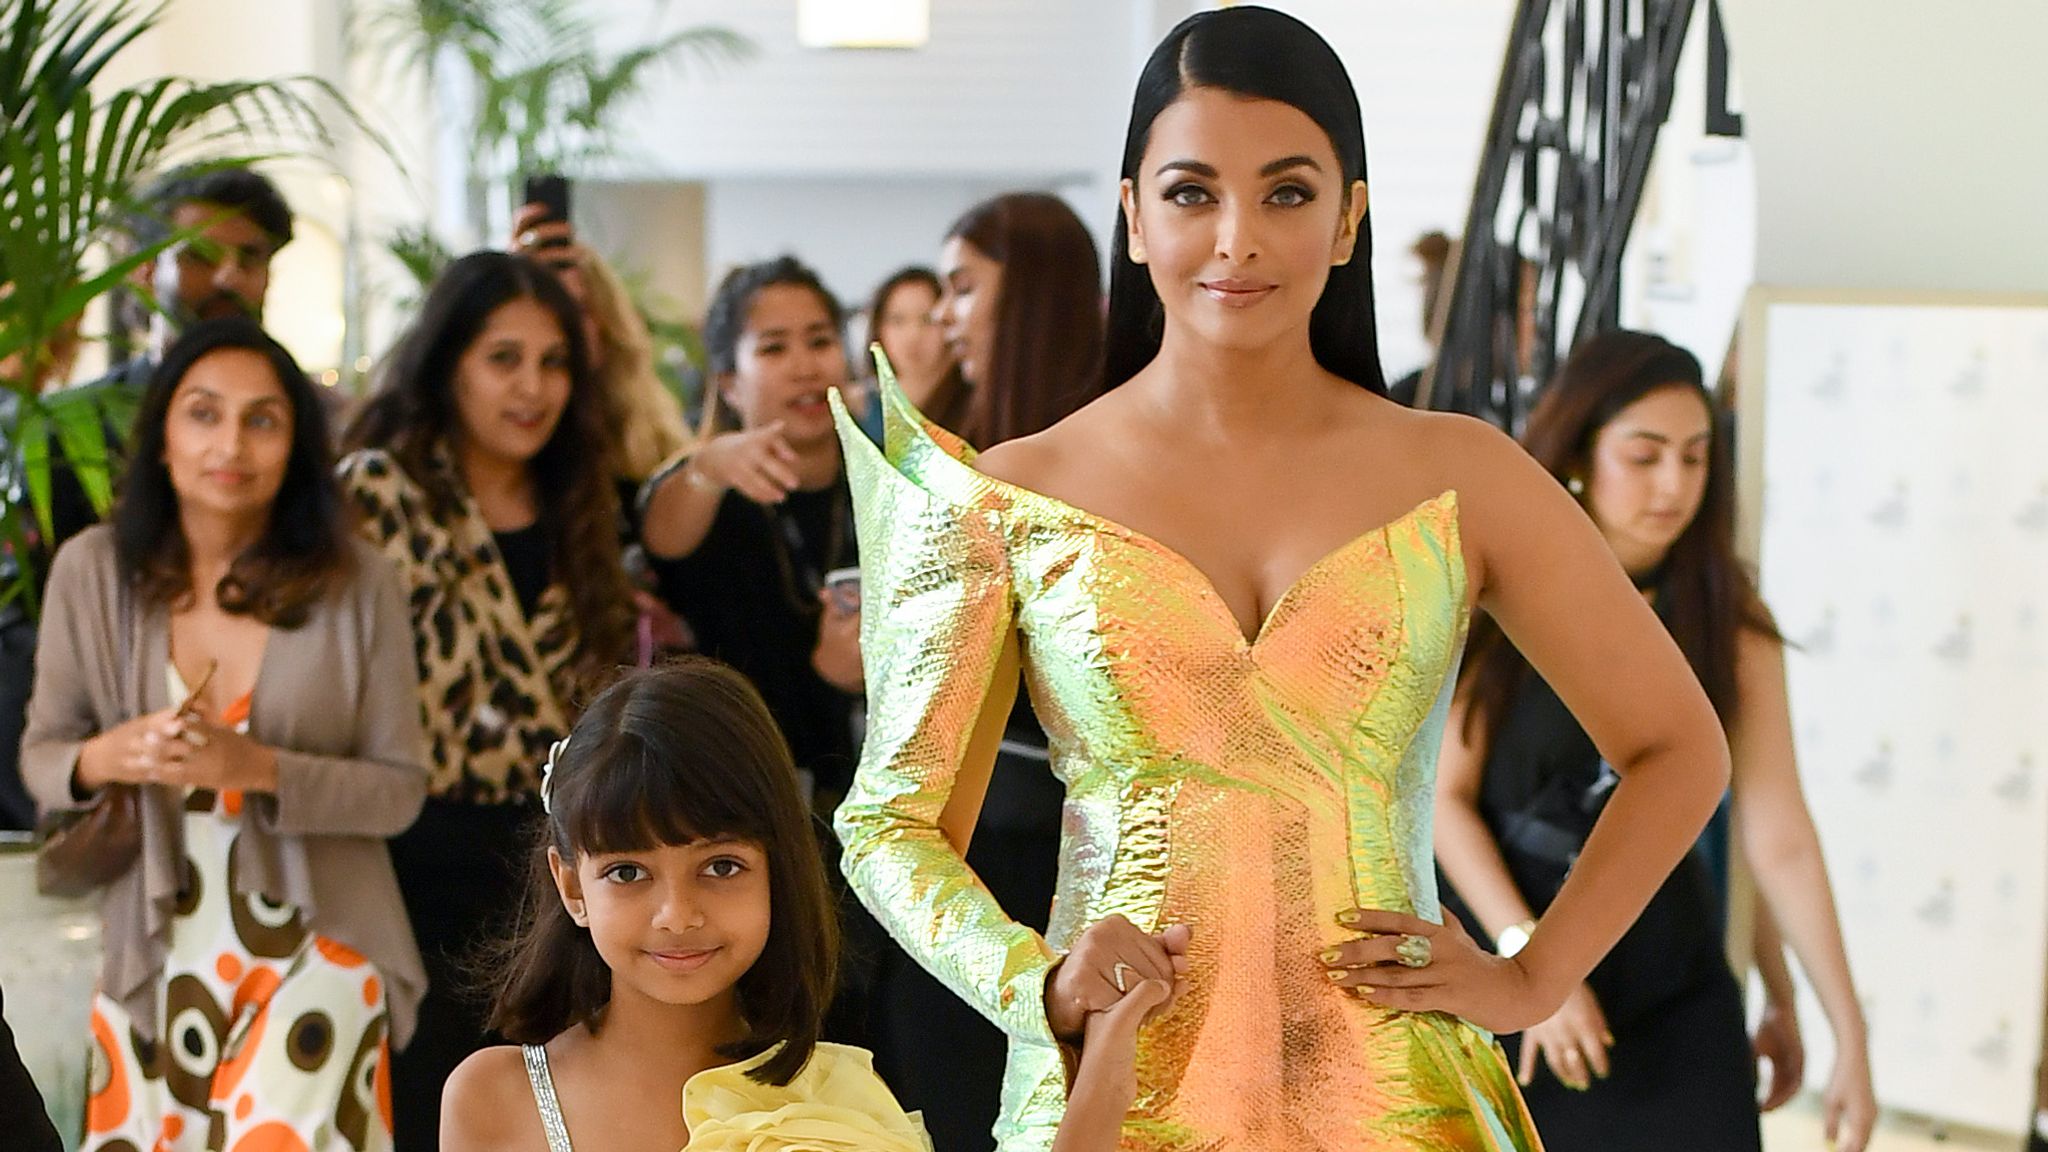 OH SO CUTE! Aishwarya with a smiling daughter Aaradhya - News -  IndiaGlitz.com